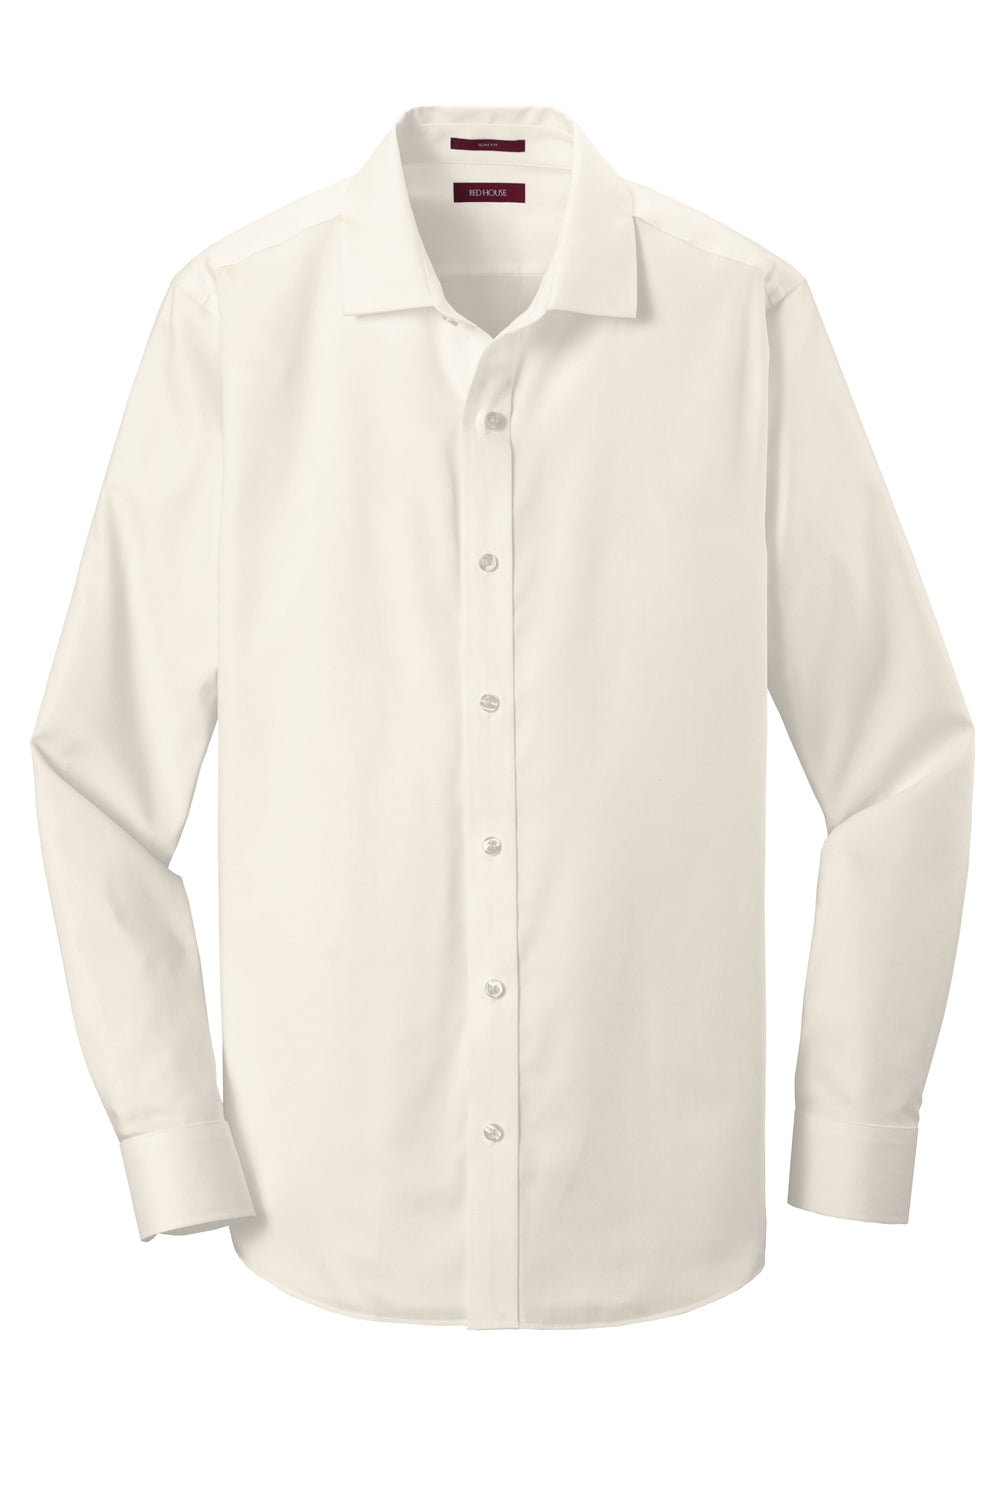 Red House RH620 Mens Pinpoint Oxford Wrinkle Resistant Long Sleeve Button Down Shirt Ivory Chiffon White Flat Front